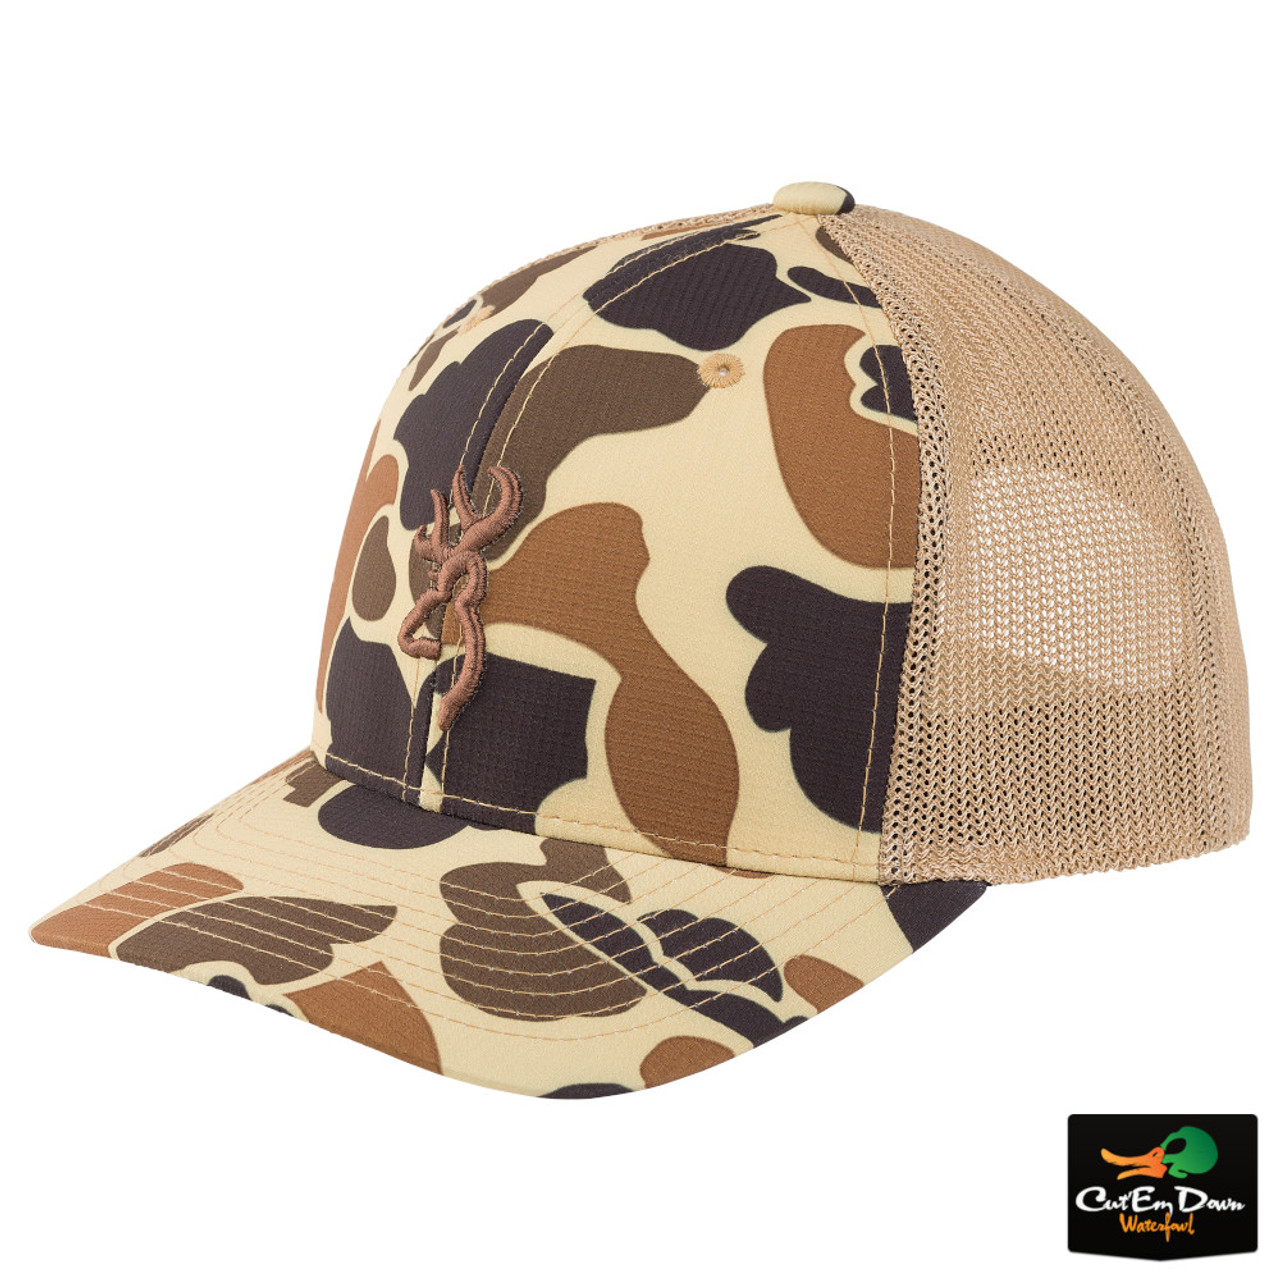 Browning Cupped Up - Cap Mesh Tan Camo Vintage Back